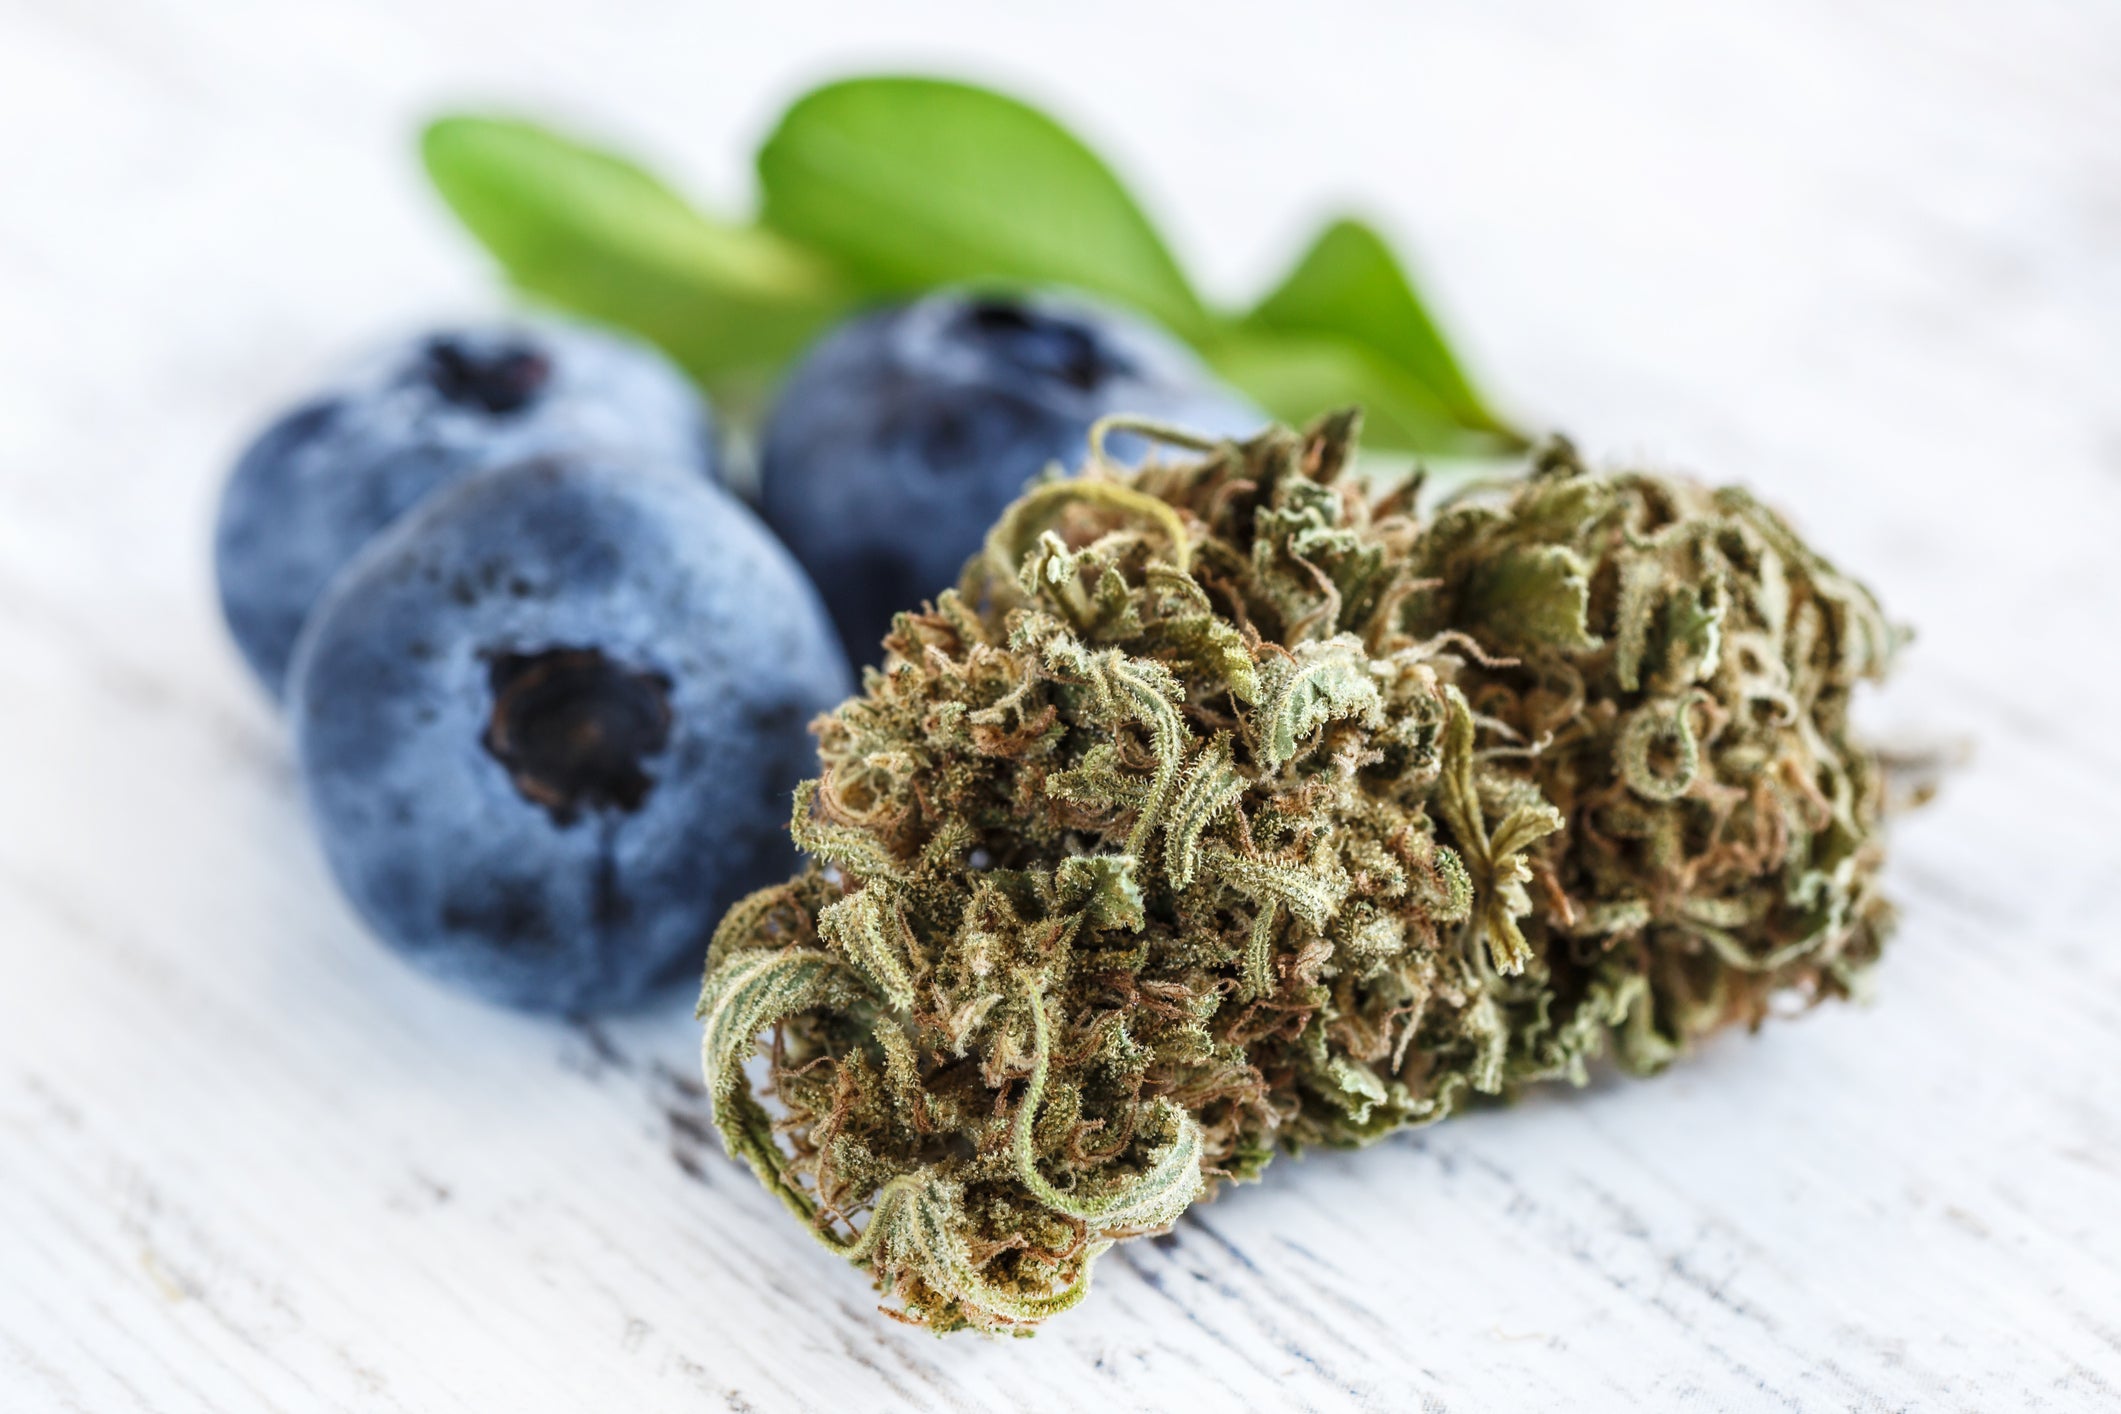 A cannabis flower nug sits next to bluberries, which have similar flavors as some strains of weed.